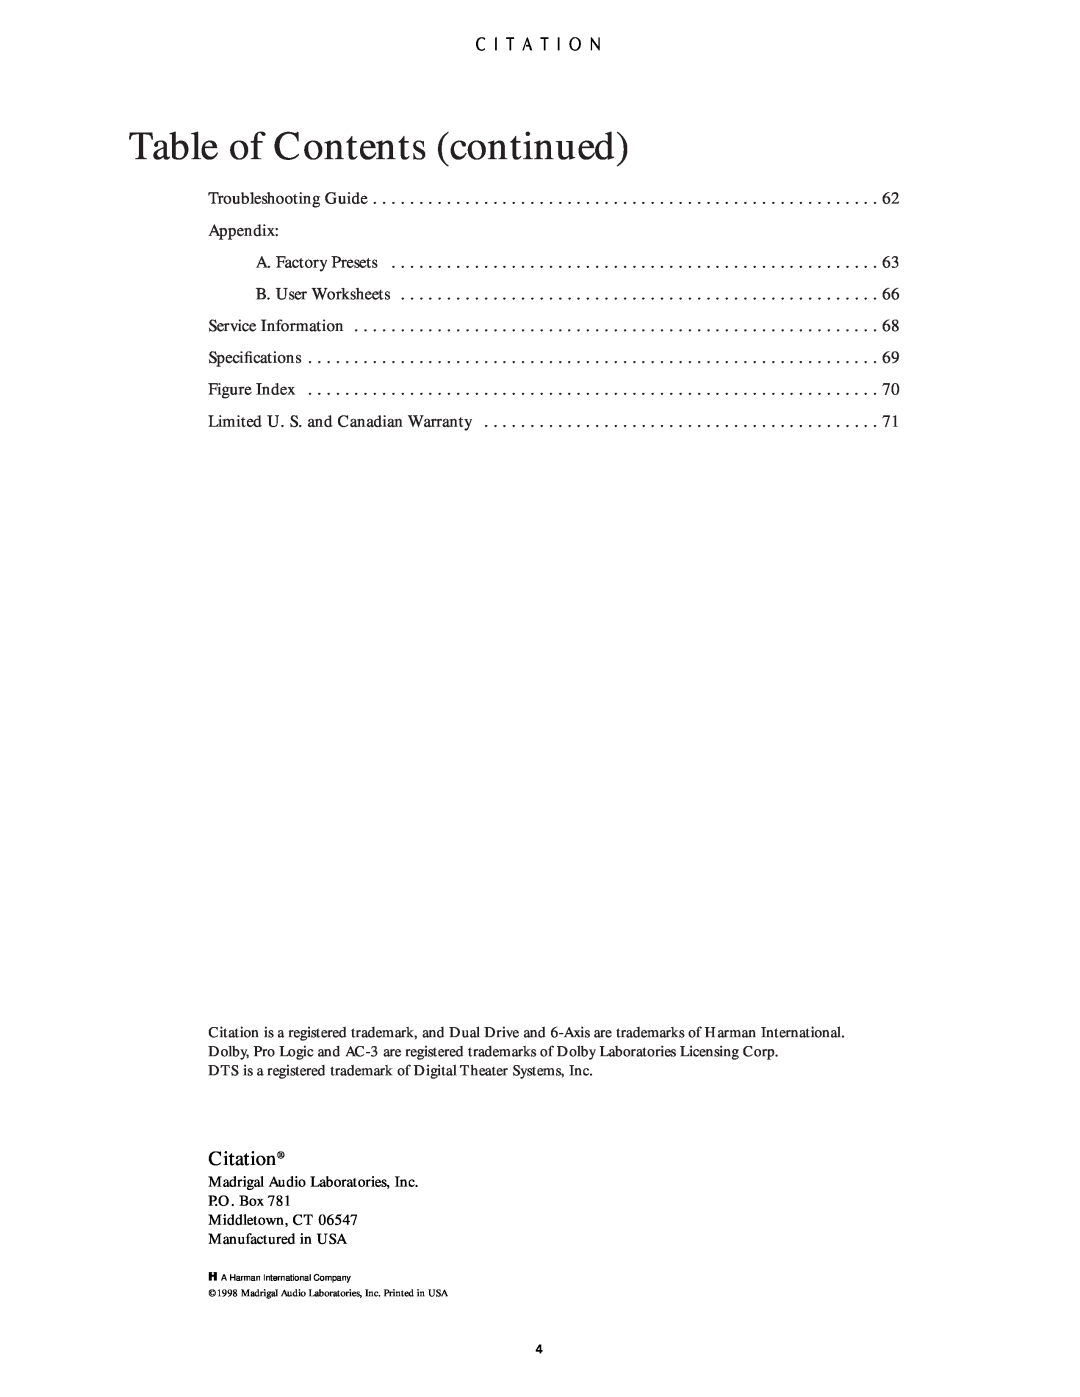 Citation Stereo Receiver owner manual Table of Contents continued, Citation 